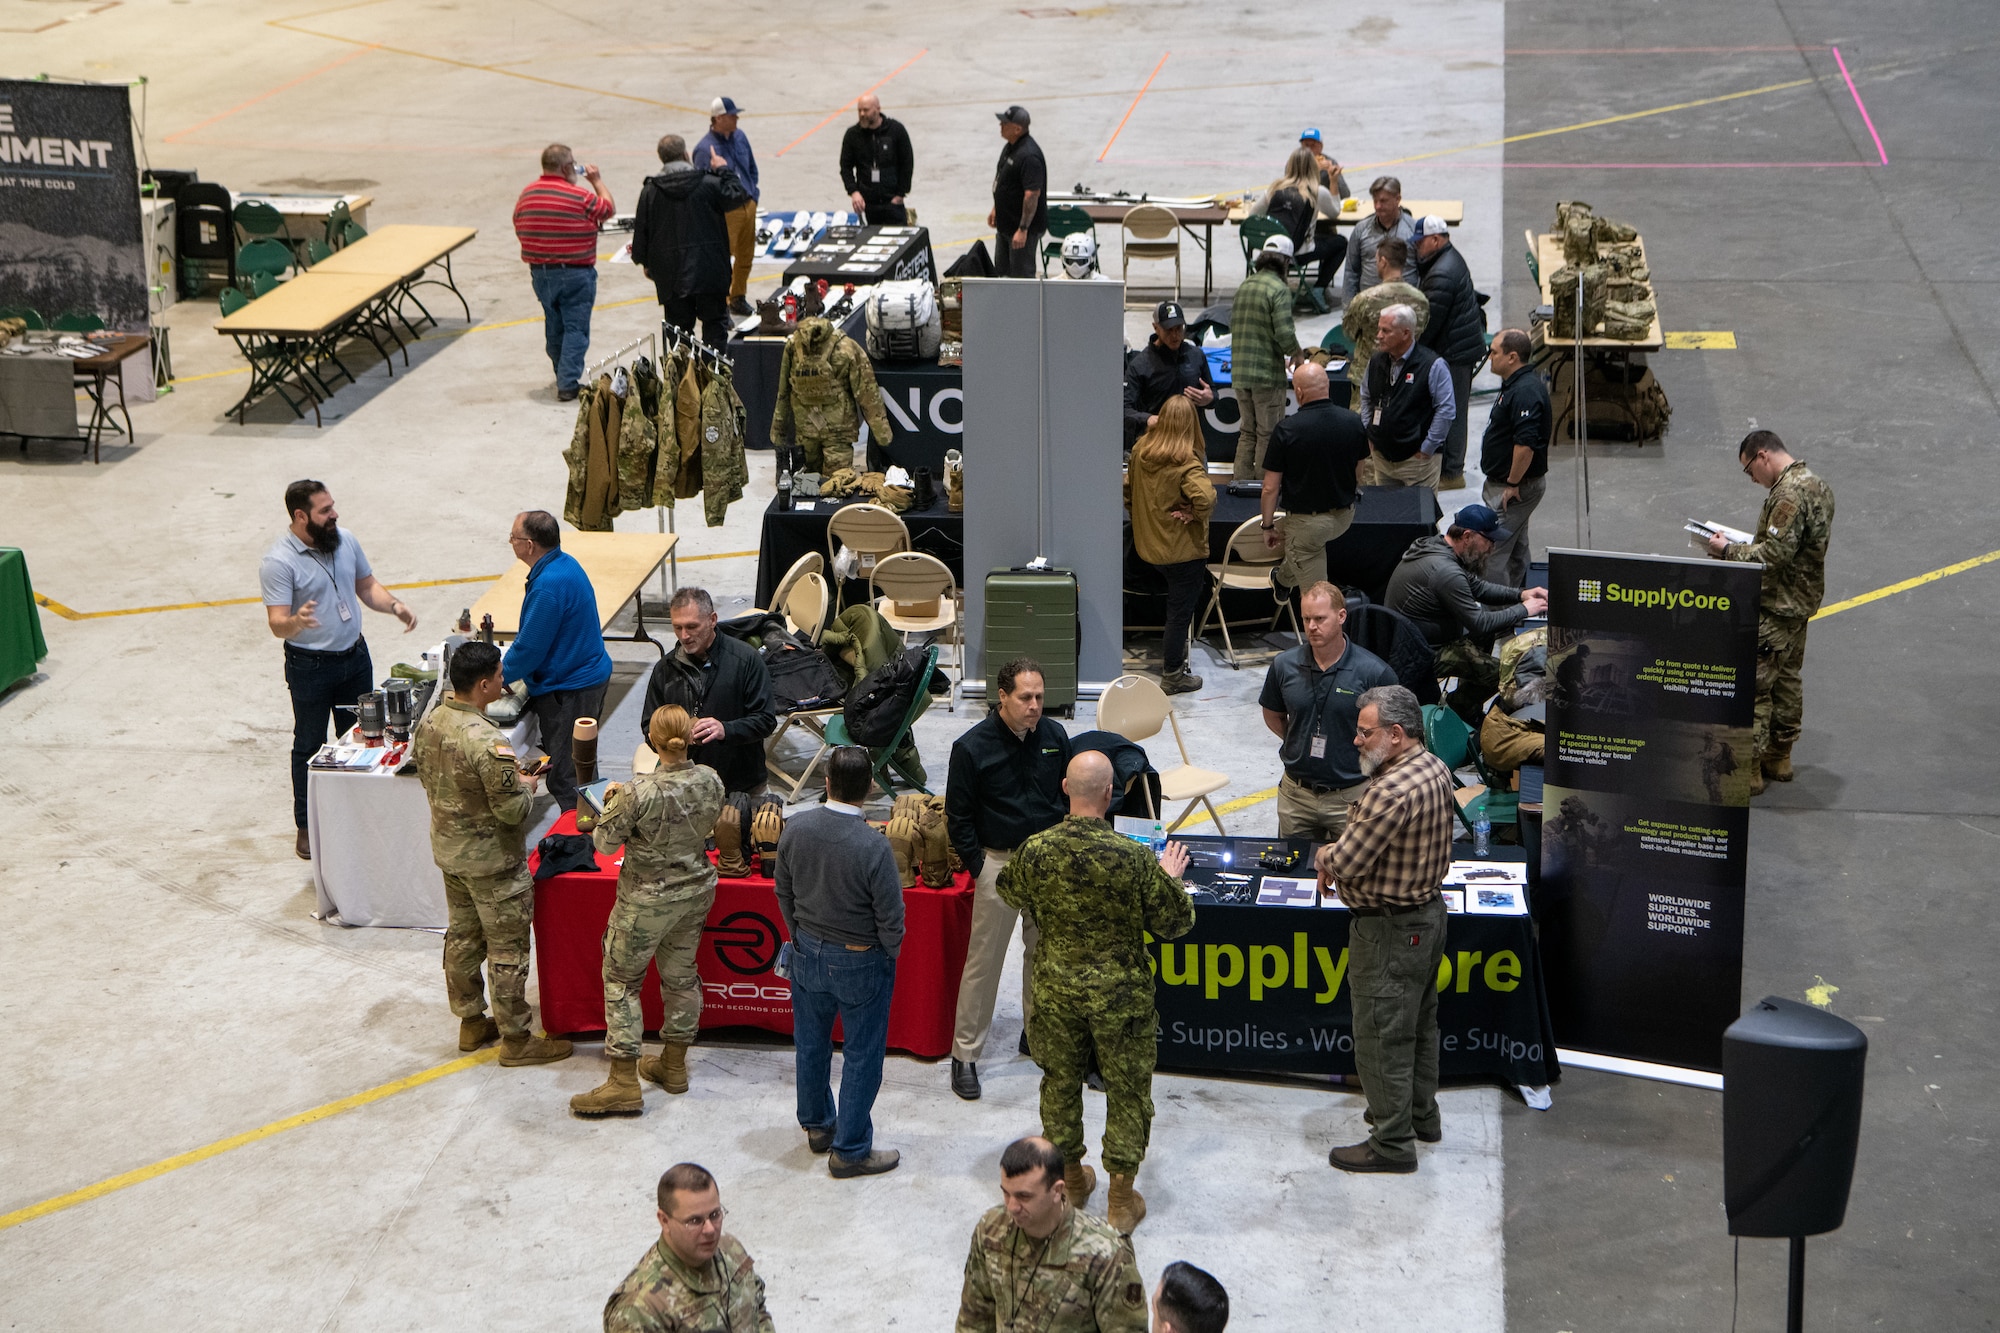 A photo of service members interacting with vendors at a technology expo